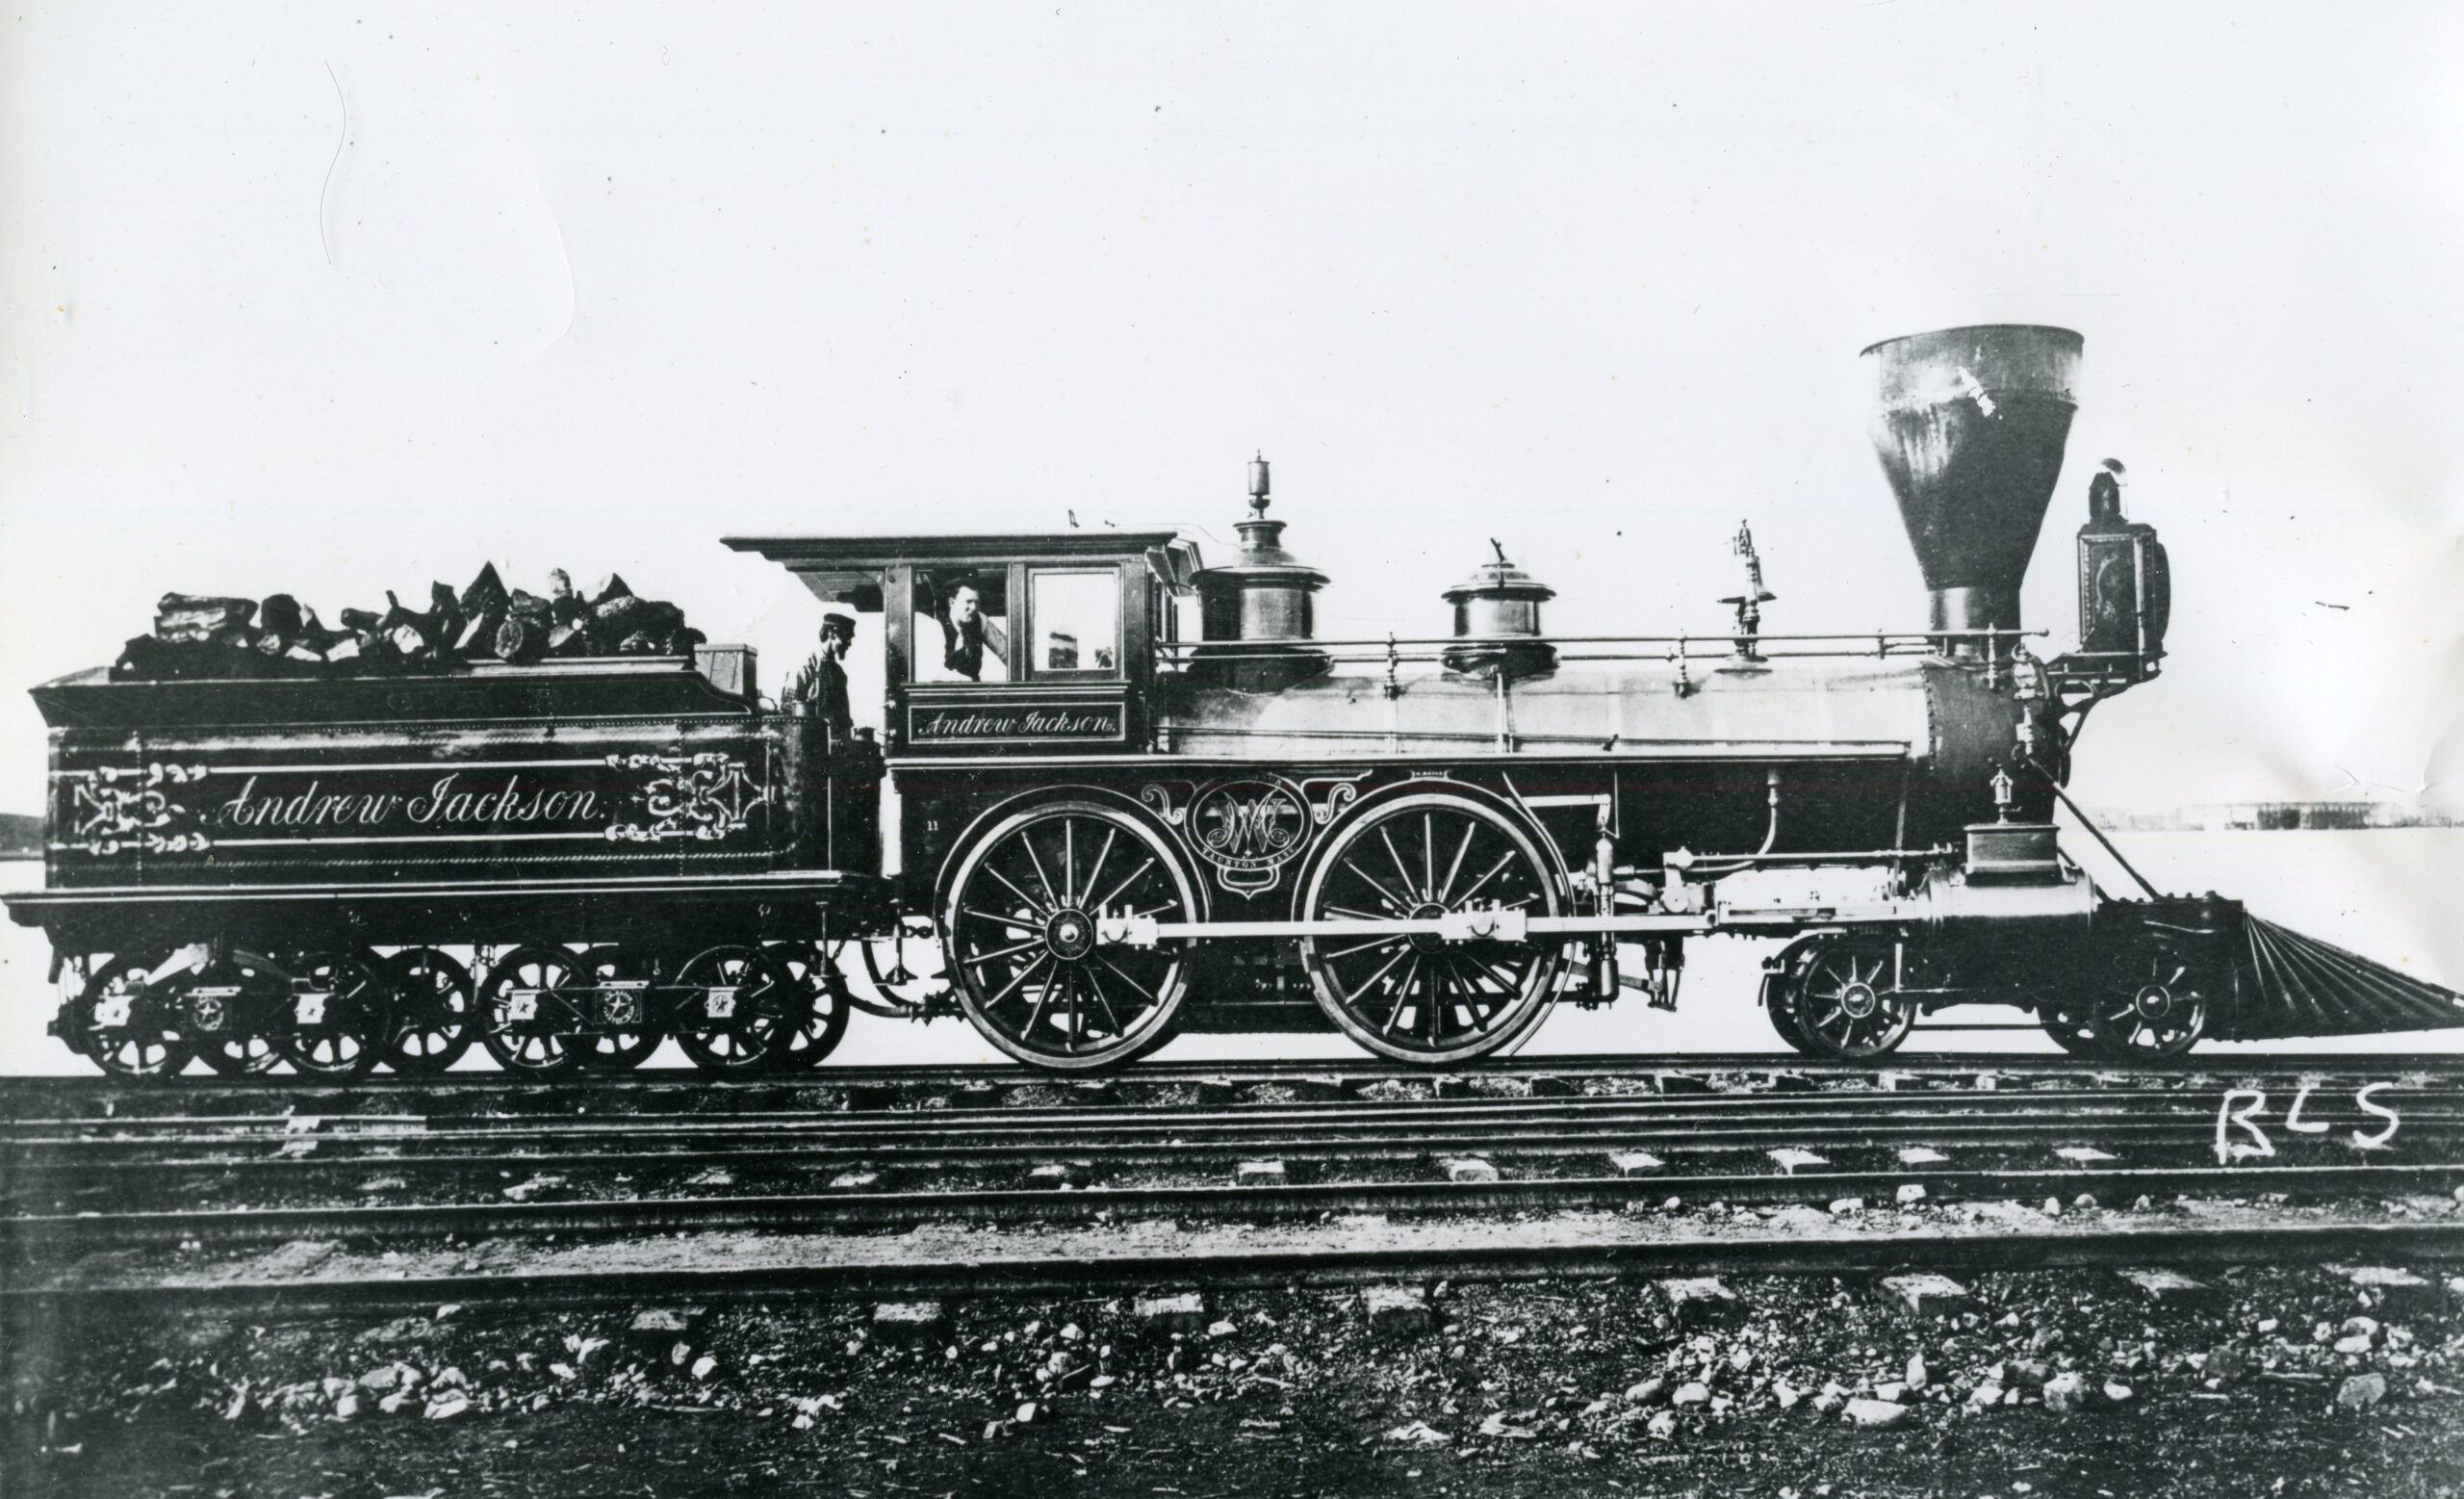 Central Pacific Railroad | Vallejo, California | Class 4-4-0 Andrew Jackson steam locomotive | 1870 | NRHS photograph archives